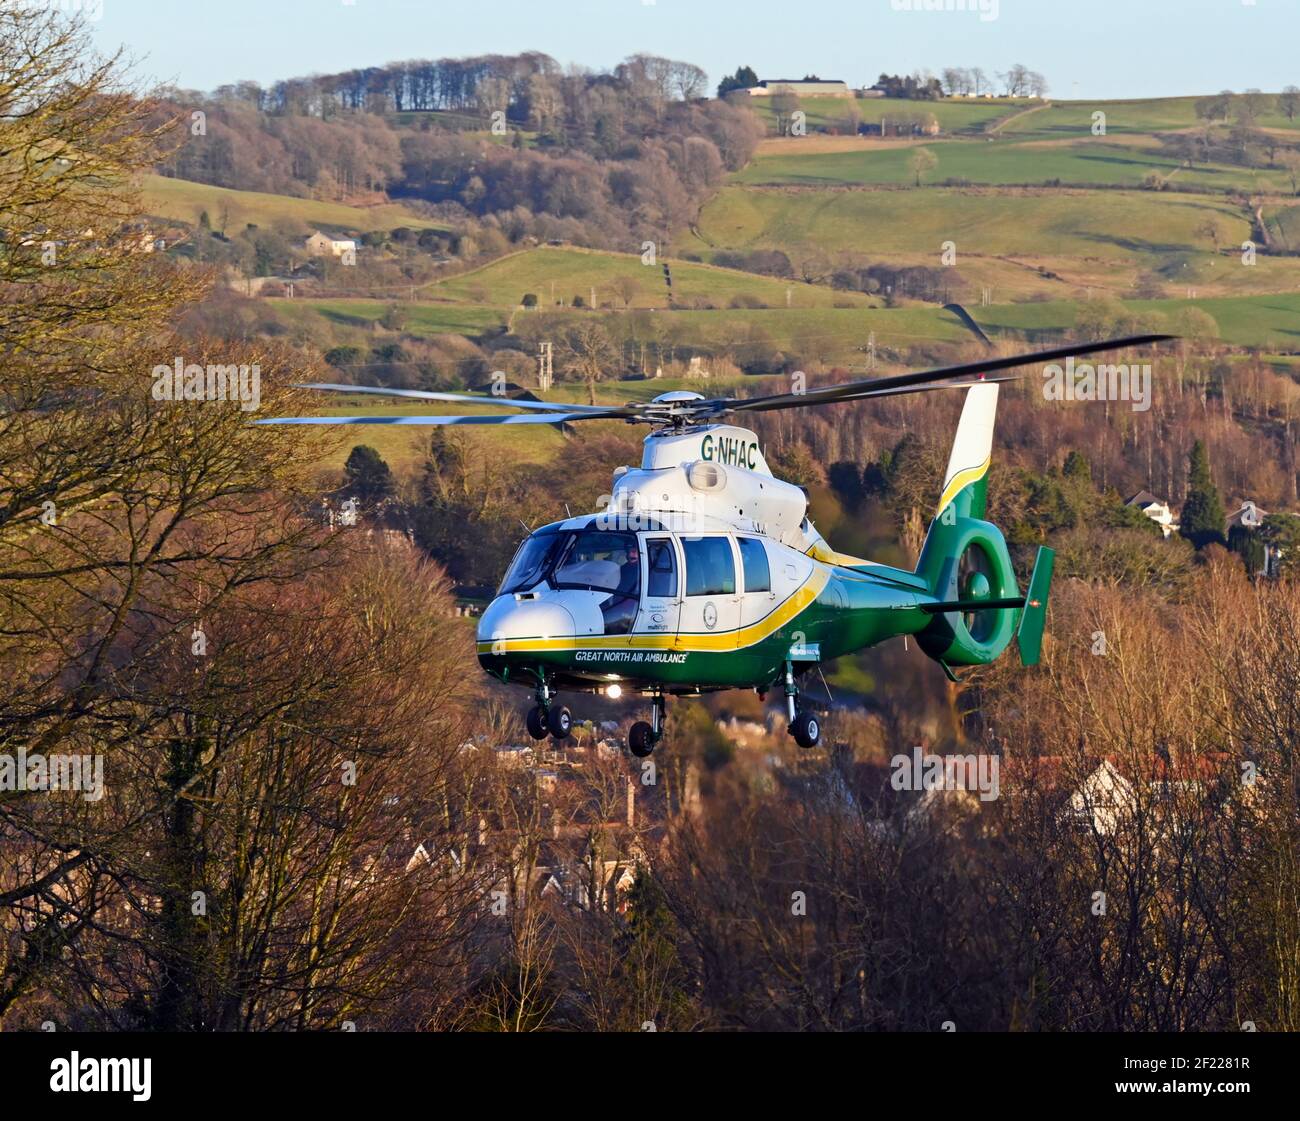 Great Northern Air Ambulance Service Helicopter, Eurocopter AS365 Dauphin N2, registrazione G-NHAC, volo sopra Kendal, Cumbria, Inghilterra, REGNO UNITO Foto Stock